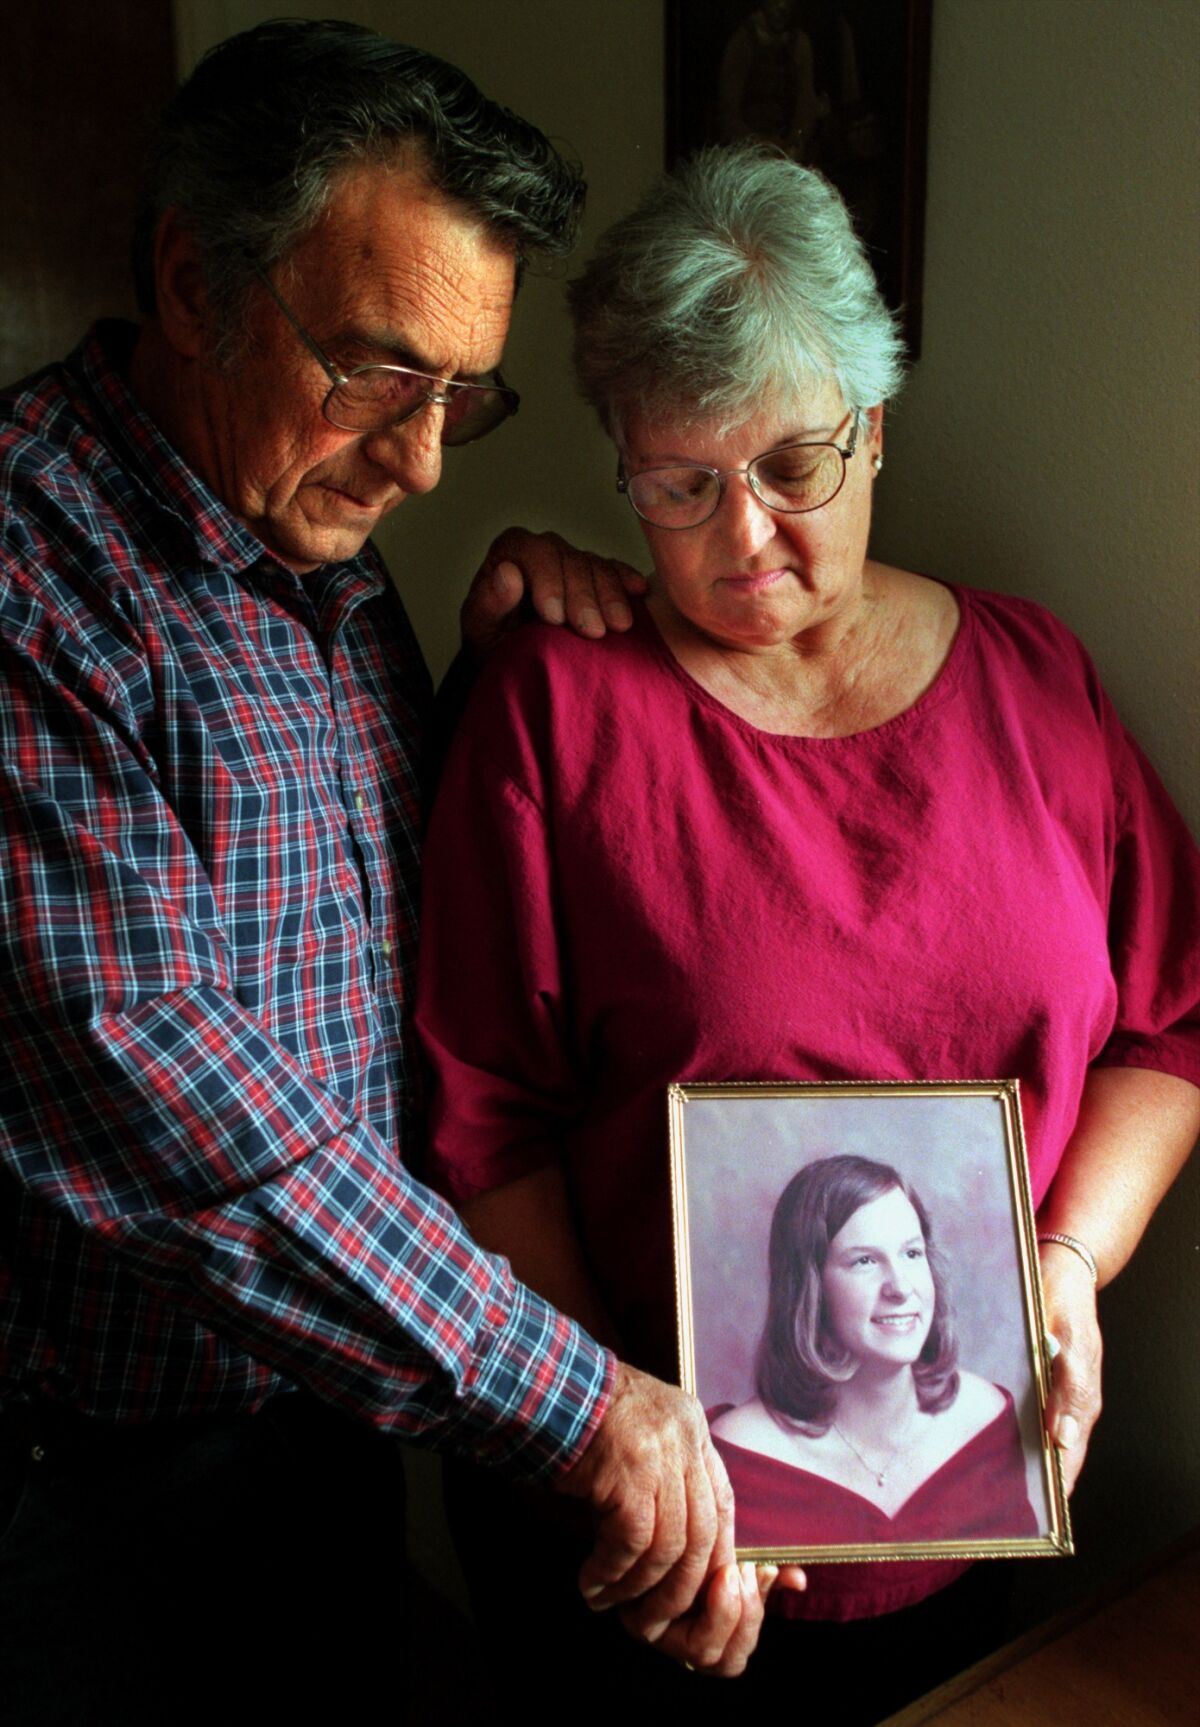 A man and a woman stand close together and both hold a framed picture of a young woman, looking at it.